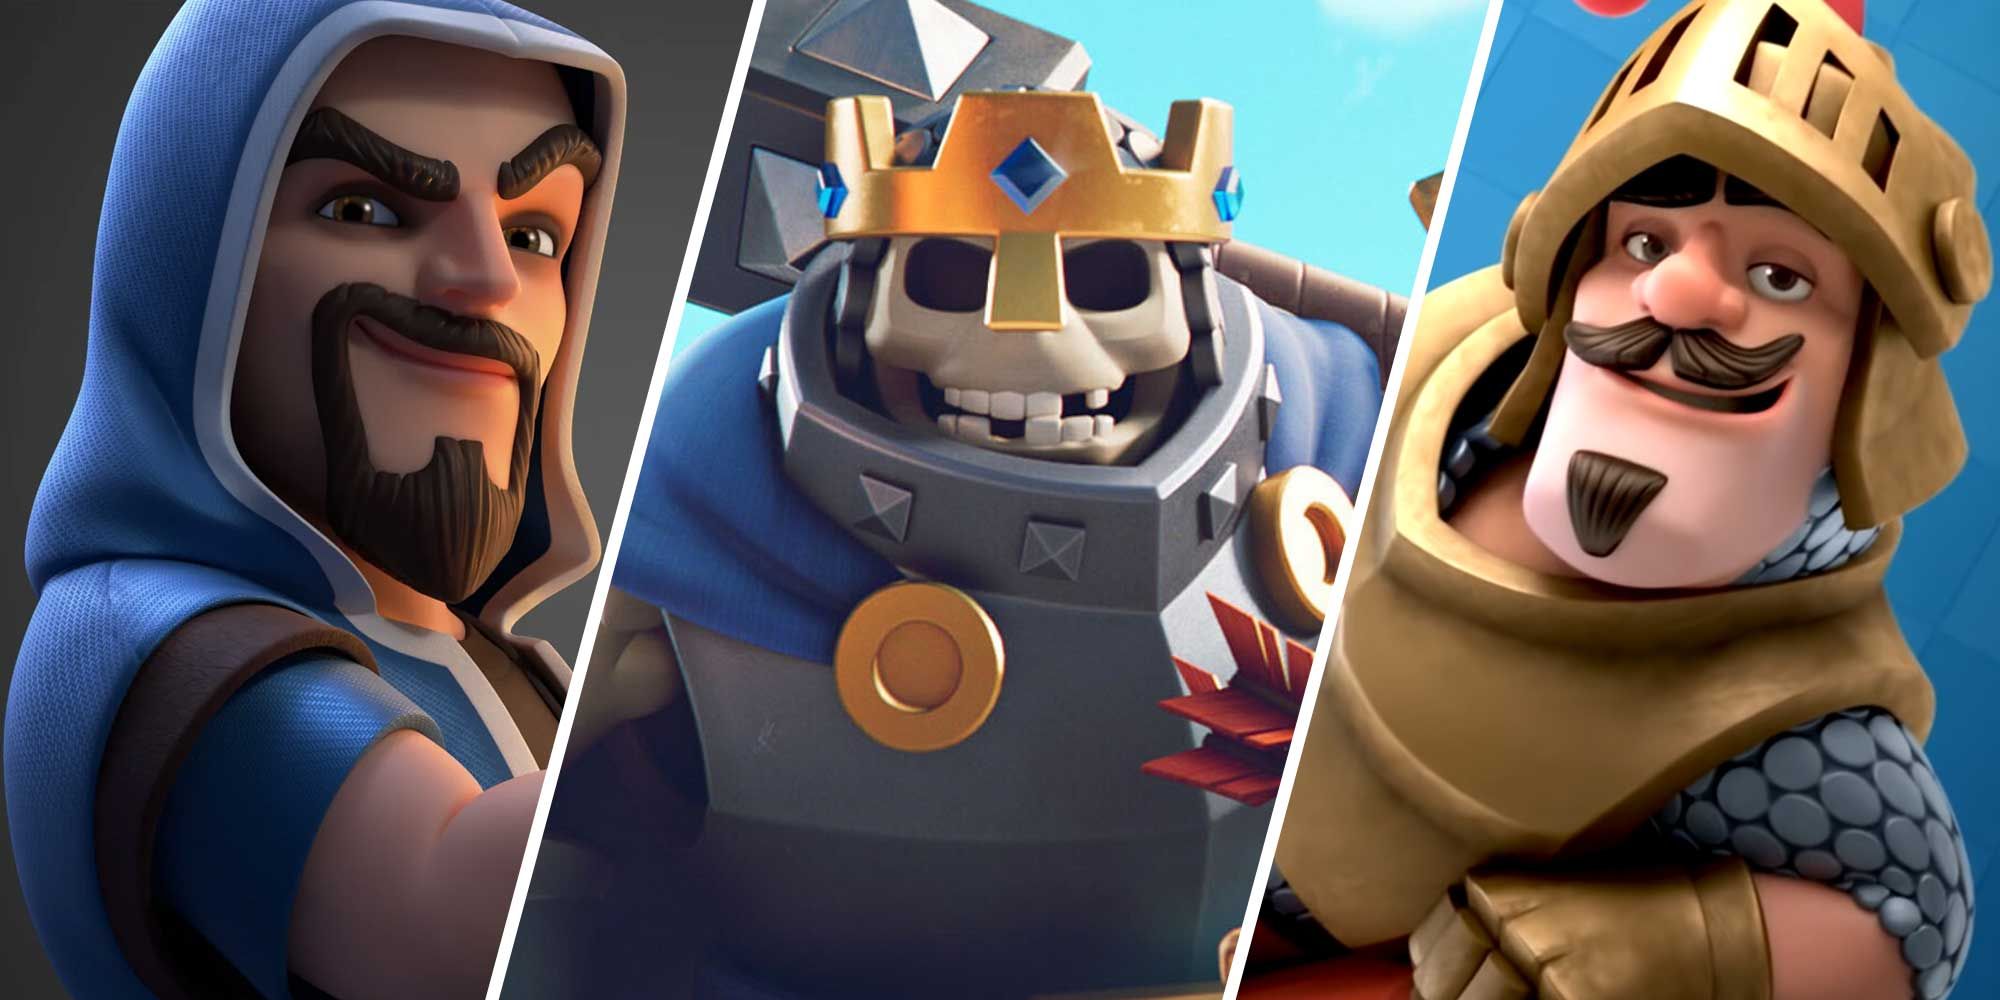 The 5 best decks with the evolution of the Mortar for Clash Royale